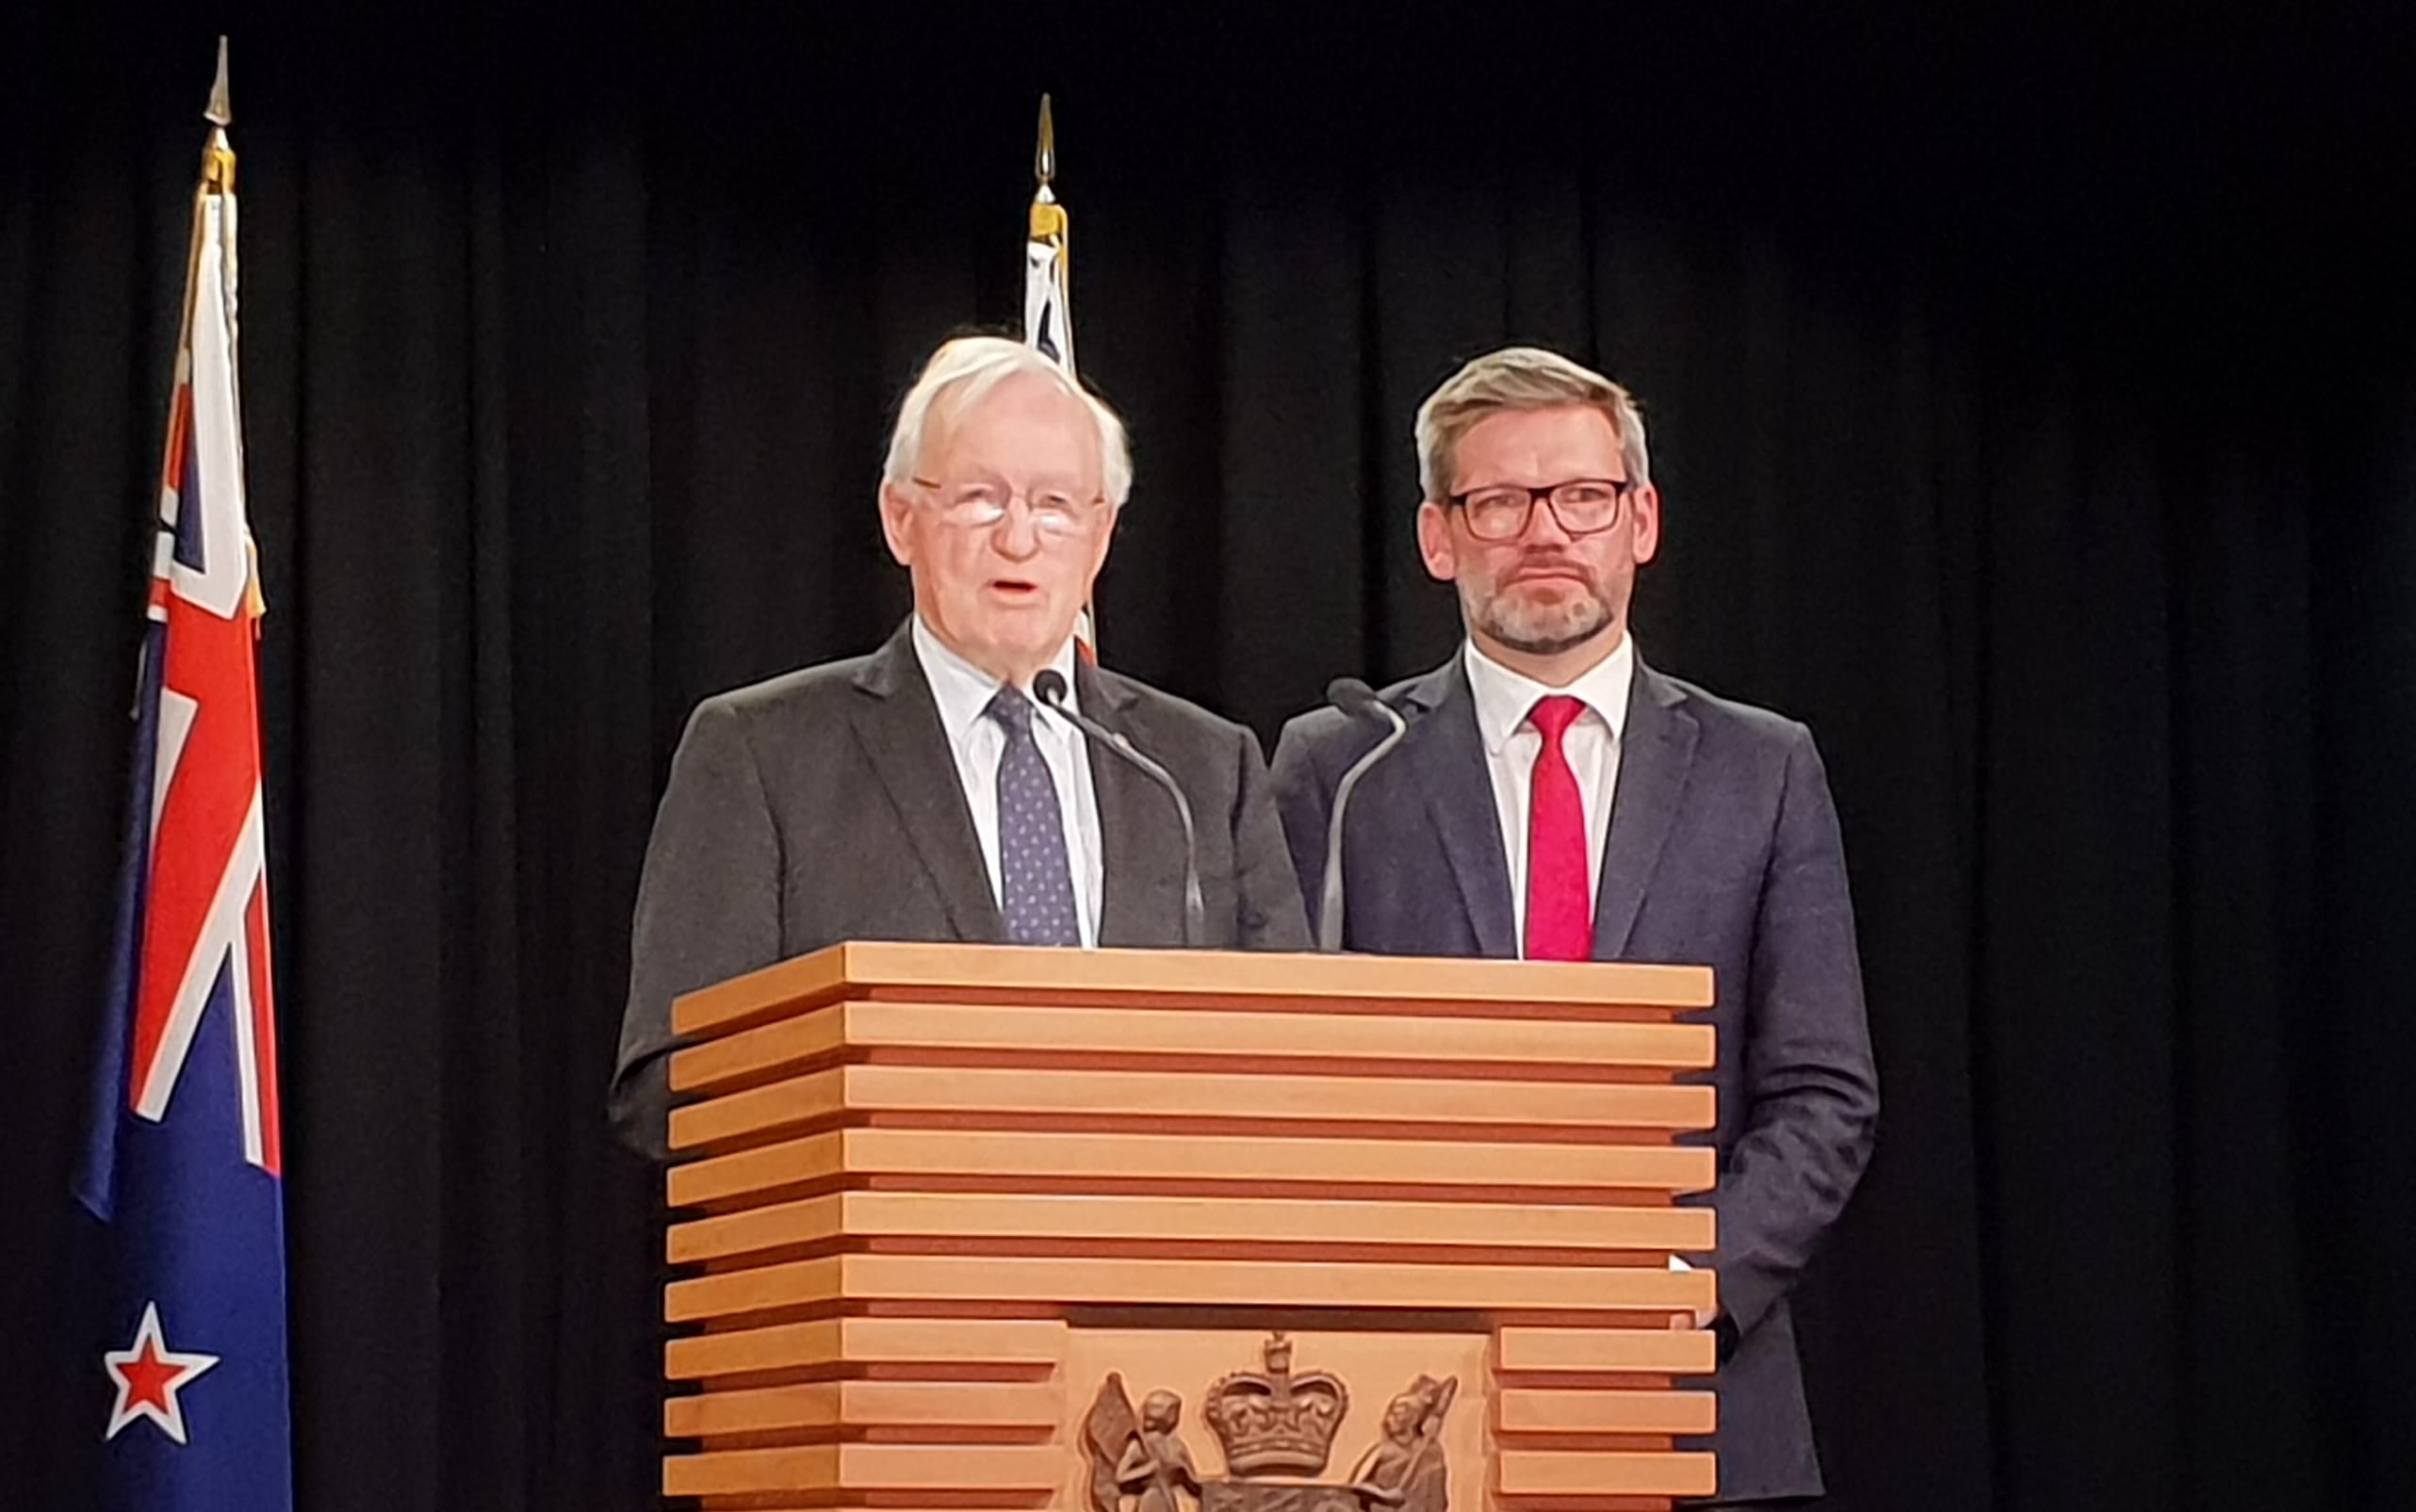 Former prime minister Jim Bolger and Minister of Workplace Relations Iain Lees-Galloway have announced a plan to set up Fair Pay Agreements.